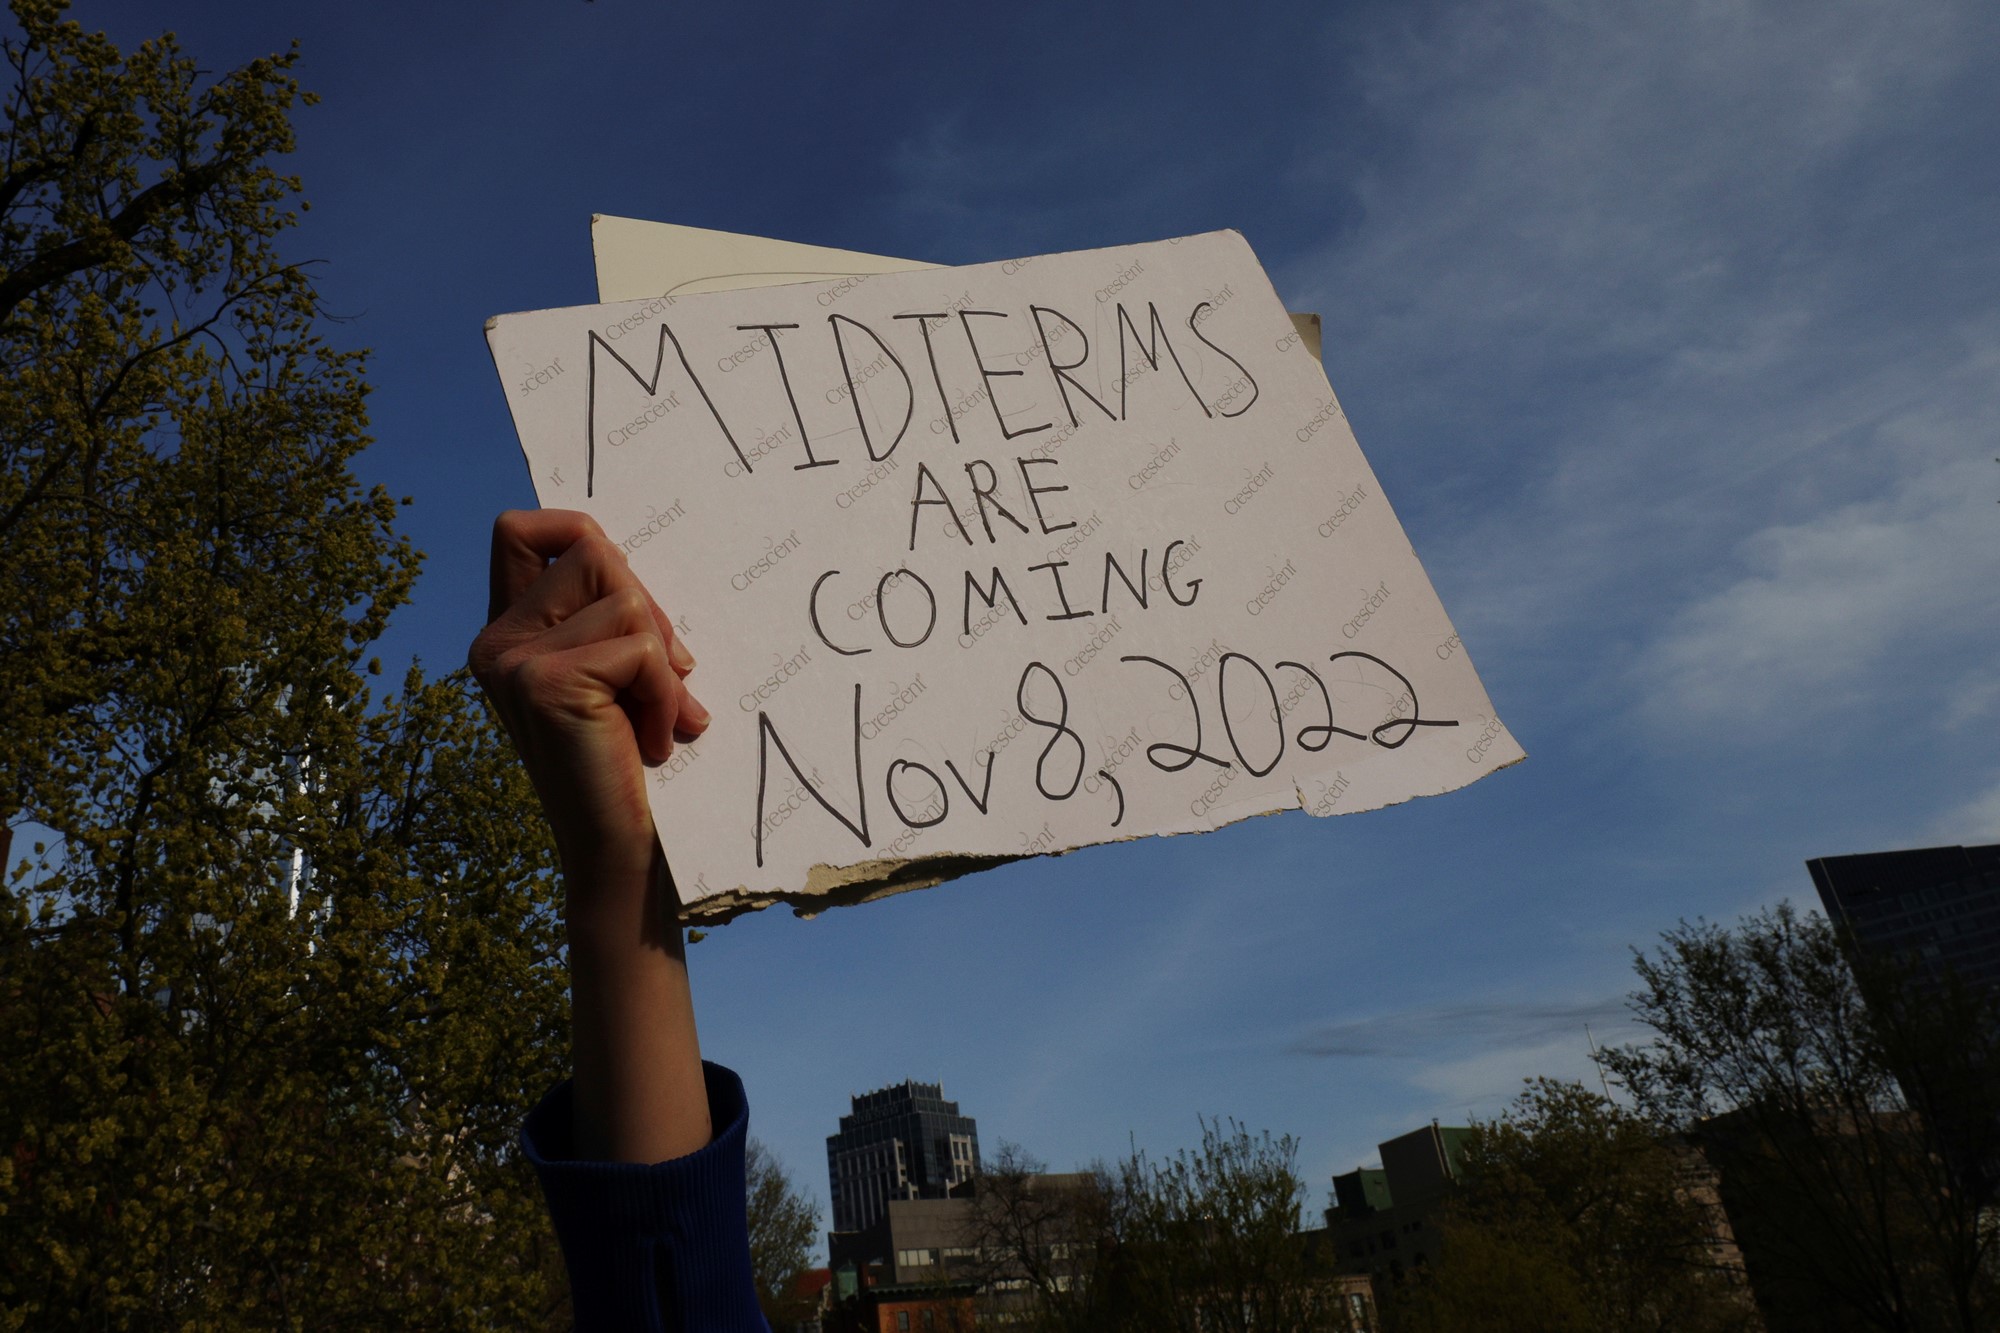 A ahnd holds a sign in the air that says "midterms are coming Nov 8 2022"